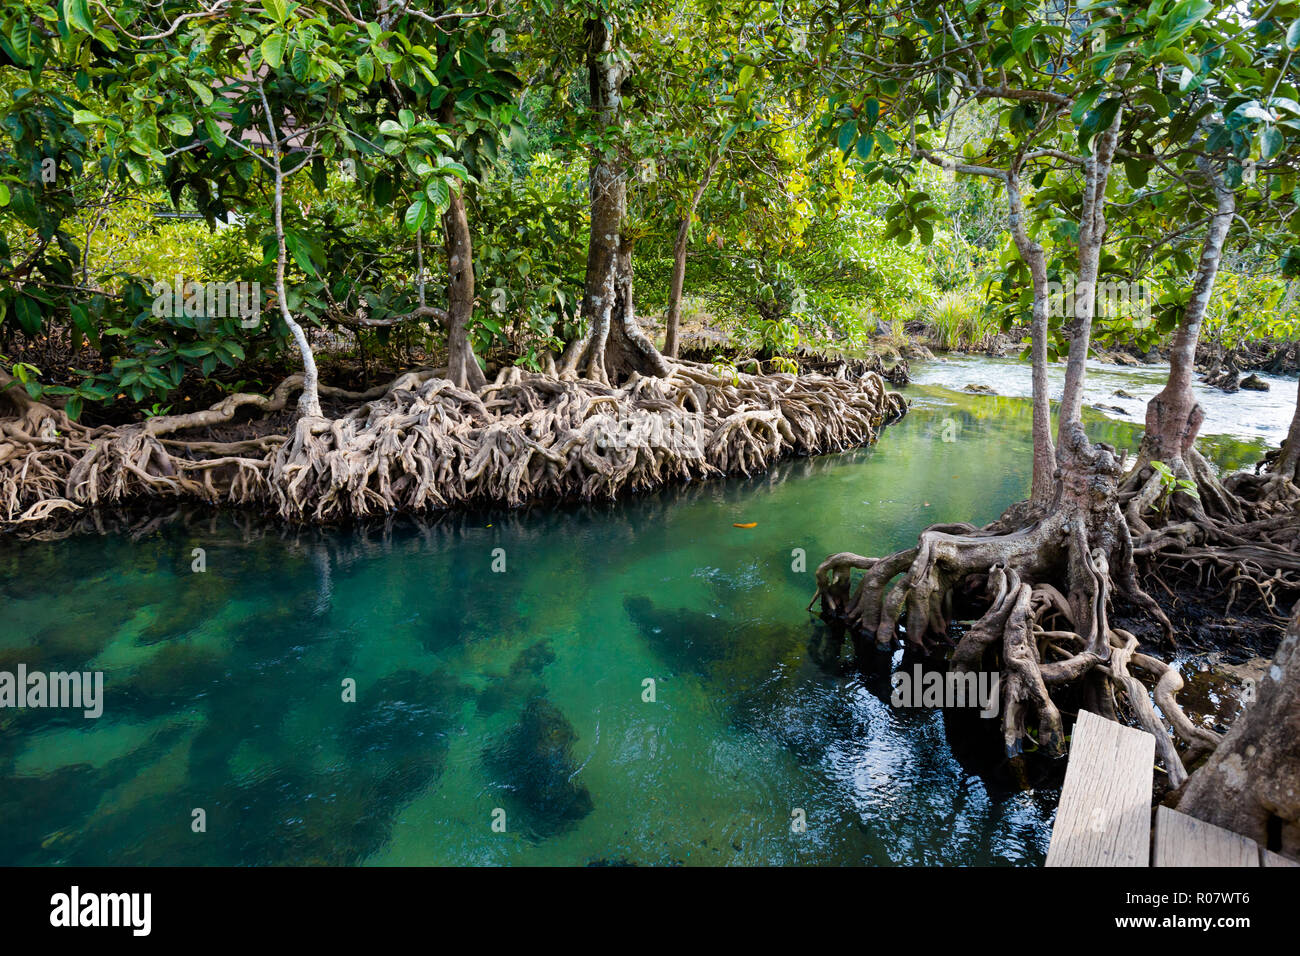 Tha Pom Khlong Song Nam in Krabi in southern Thailand. Landscape taken in beautiful mangrove reserve in south east Asia. Stock Photo